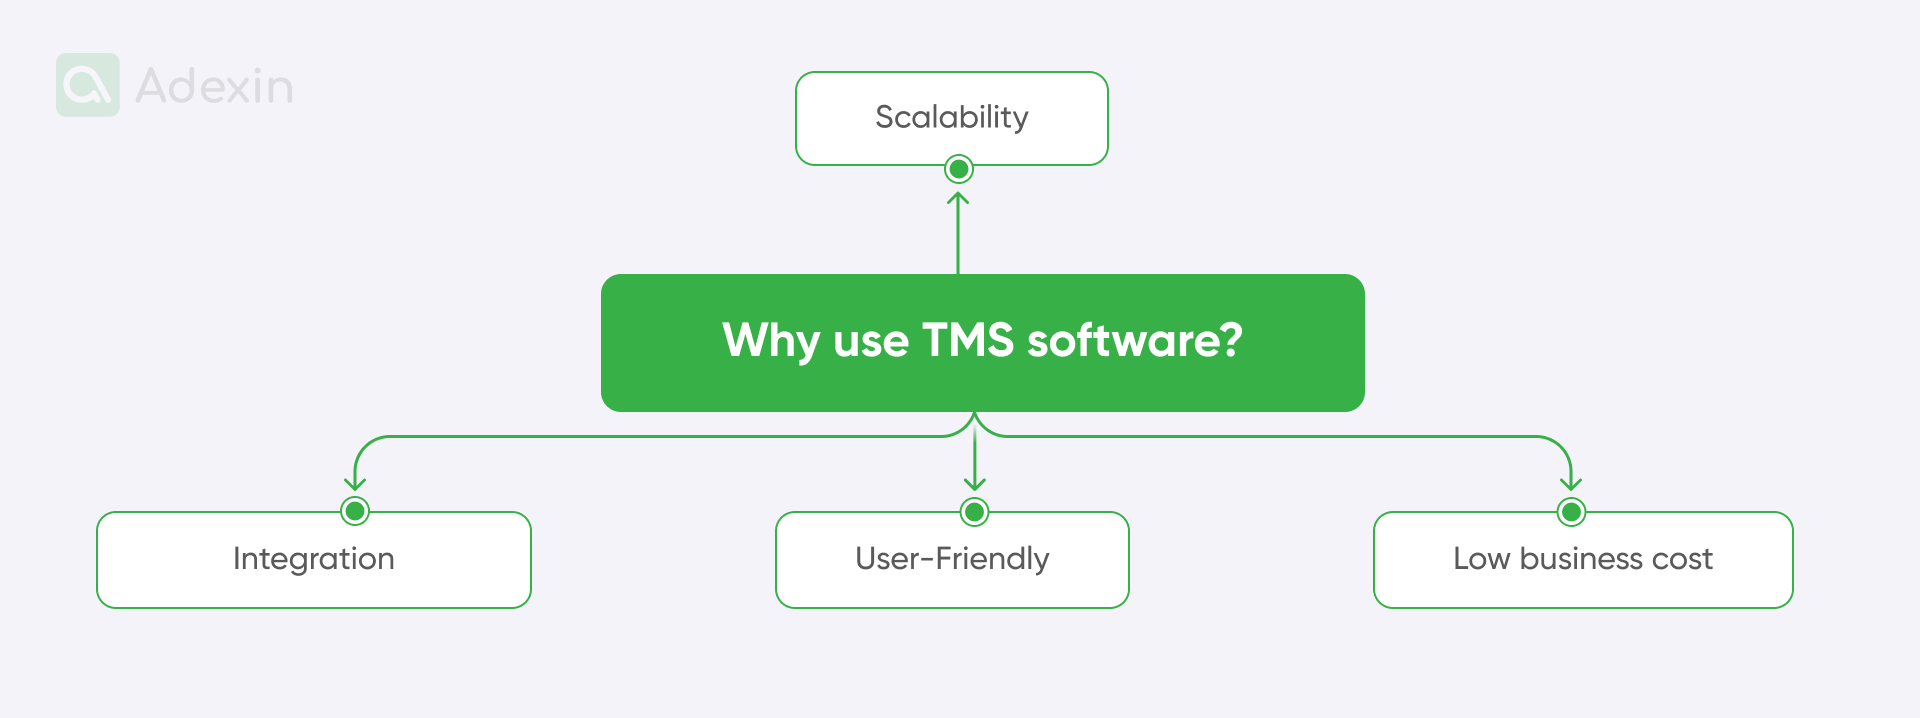 Benefits of TMS software